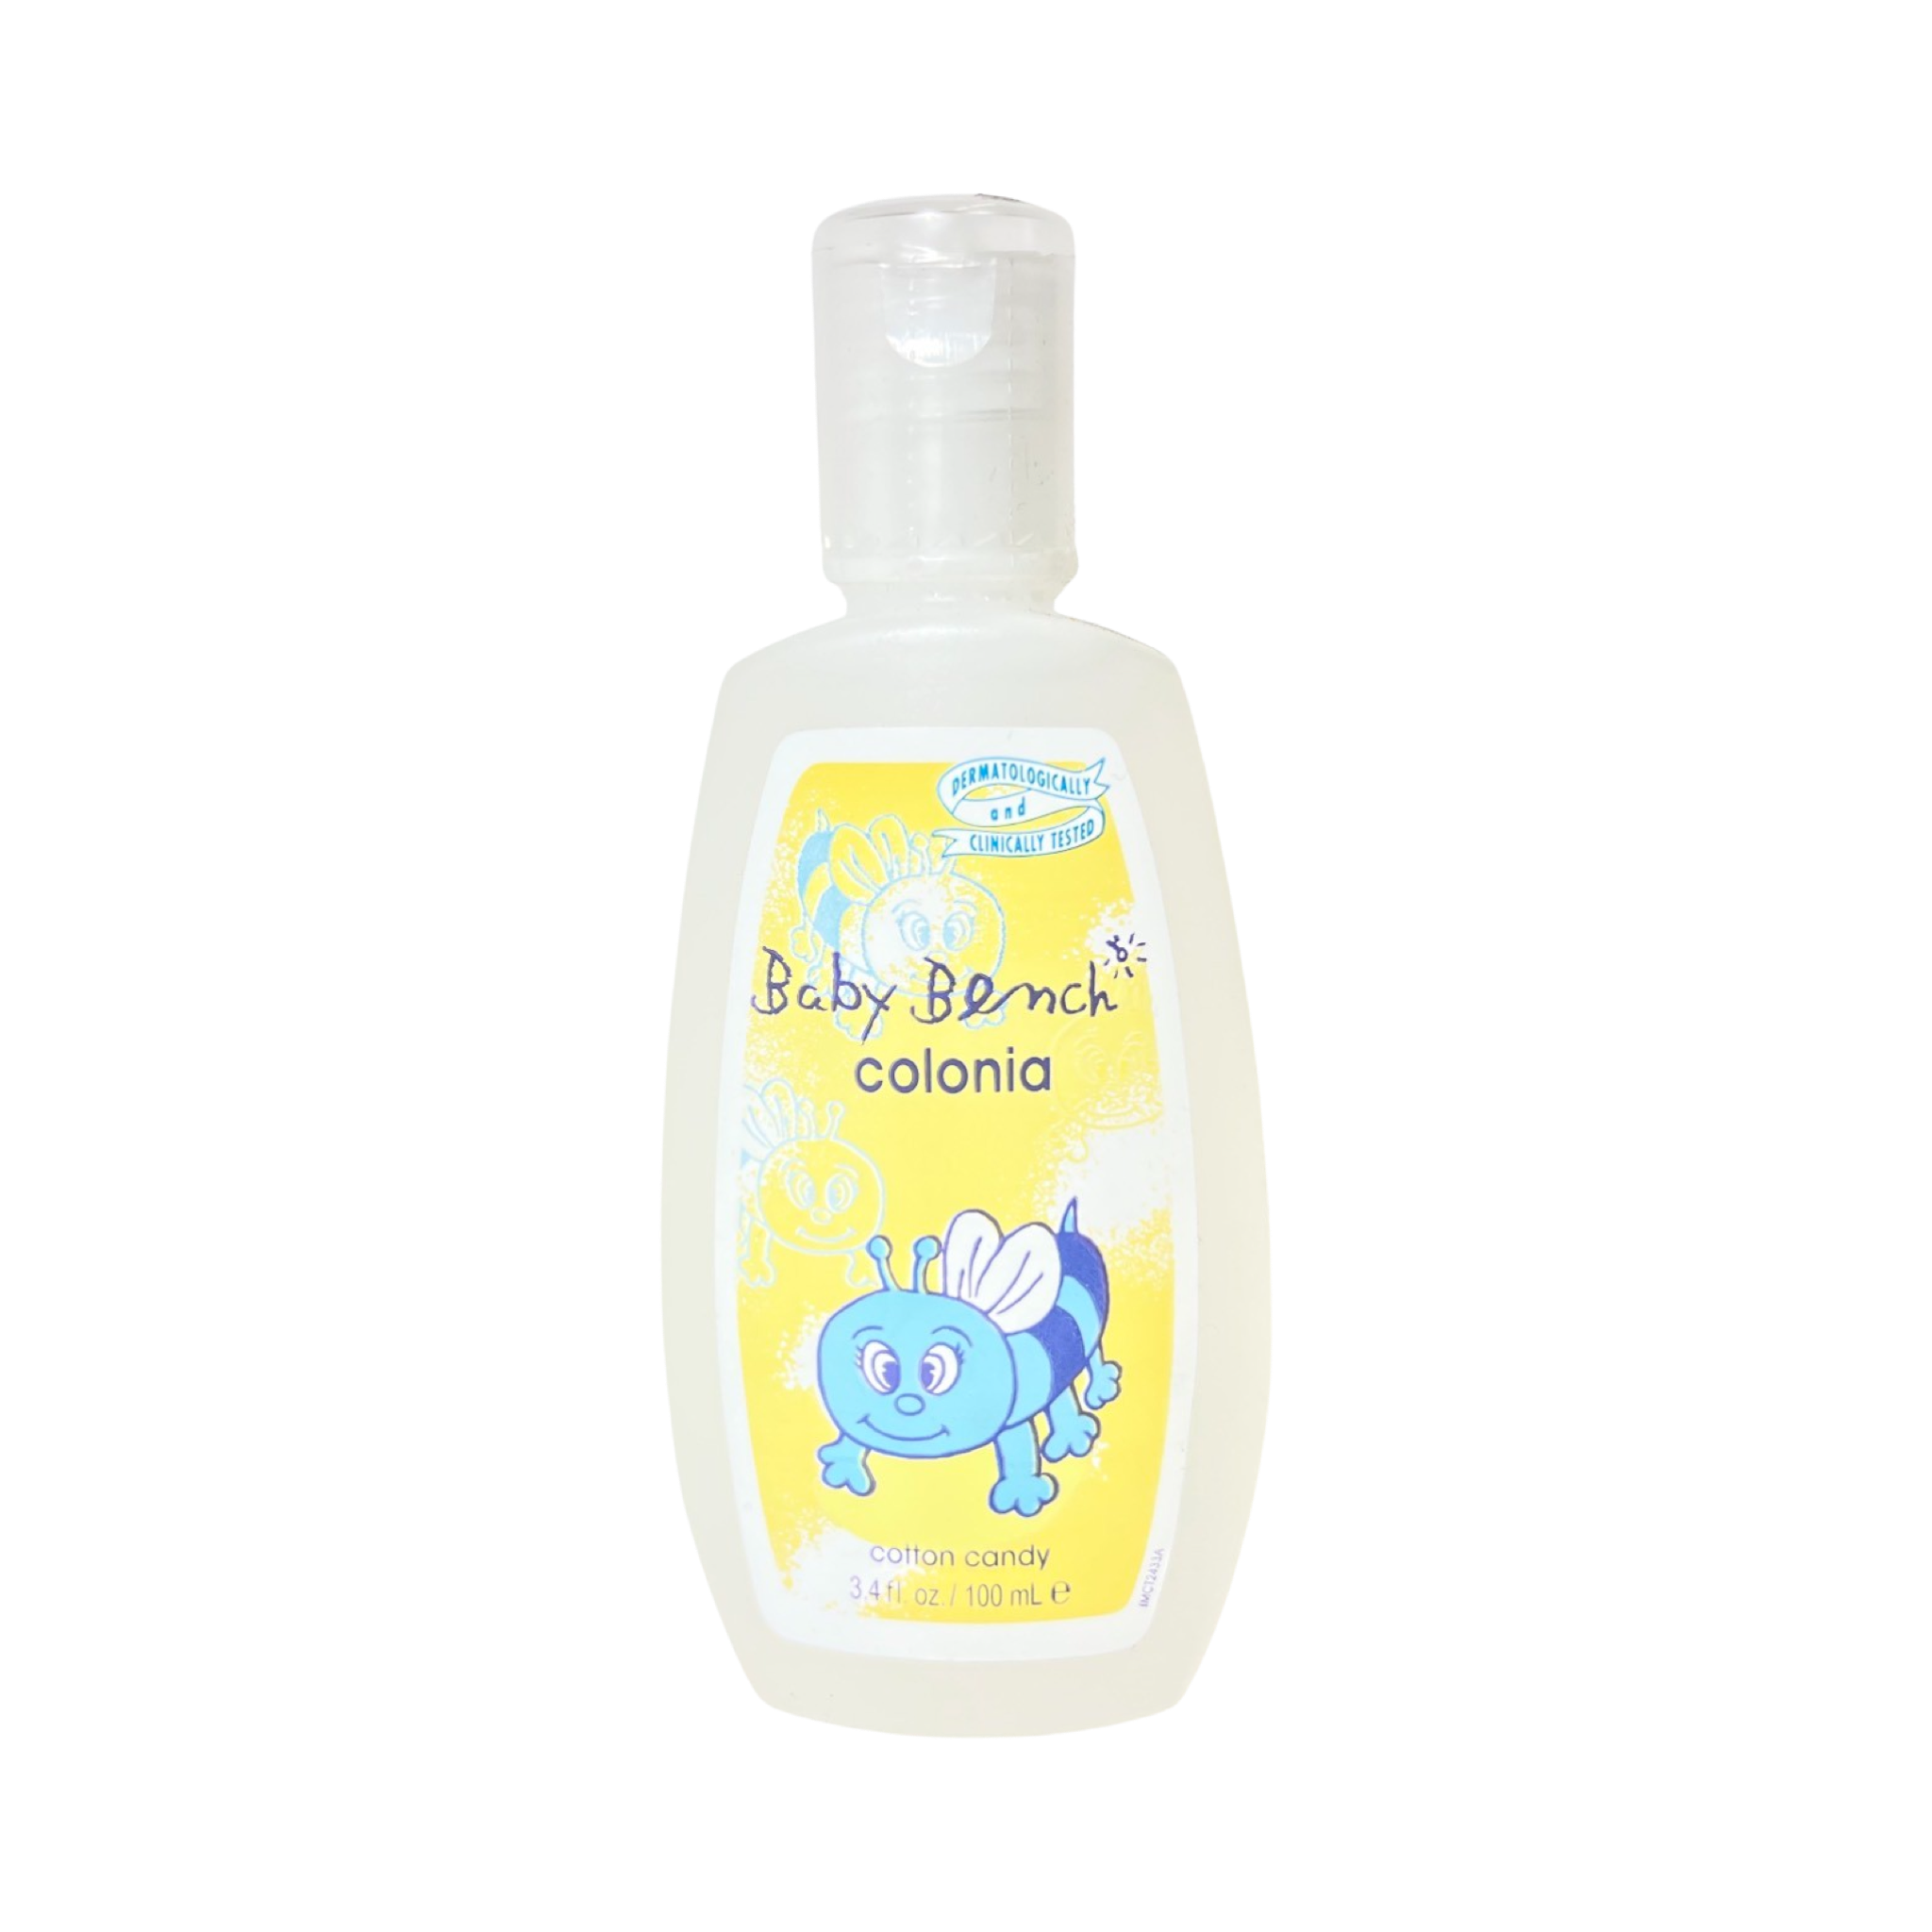 Baby Bench Colonia Cotton Candy 100 mL